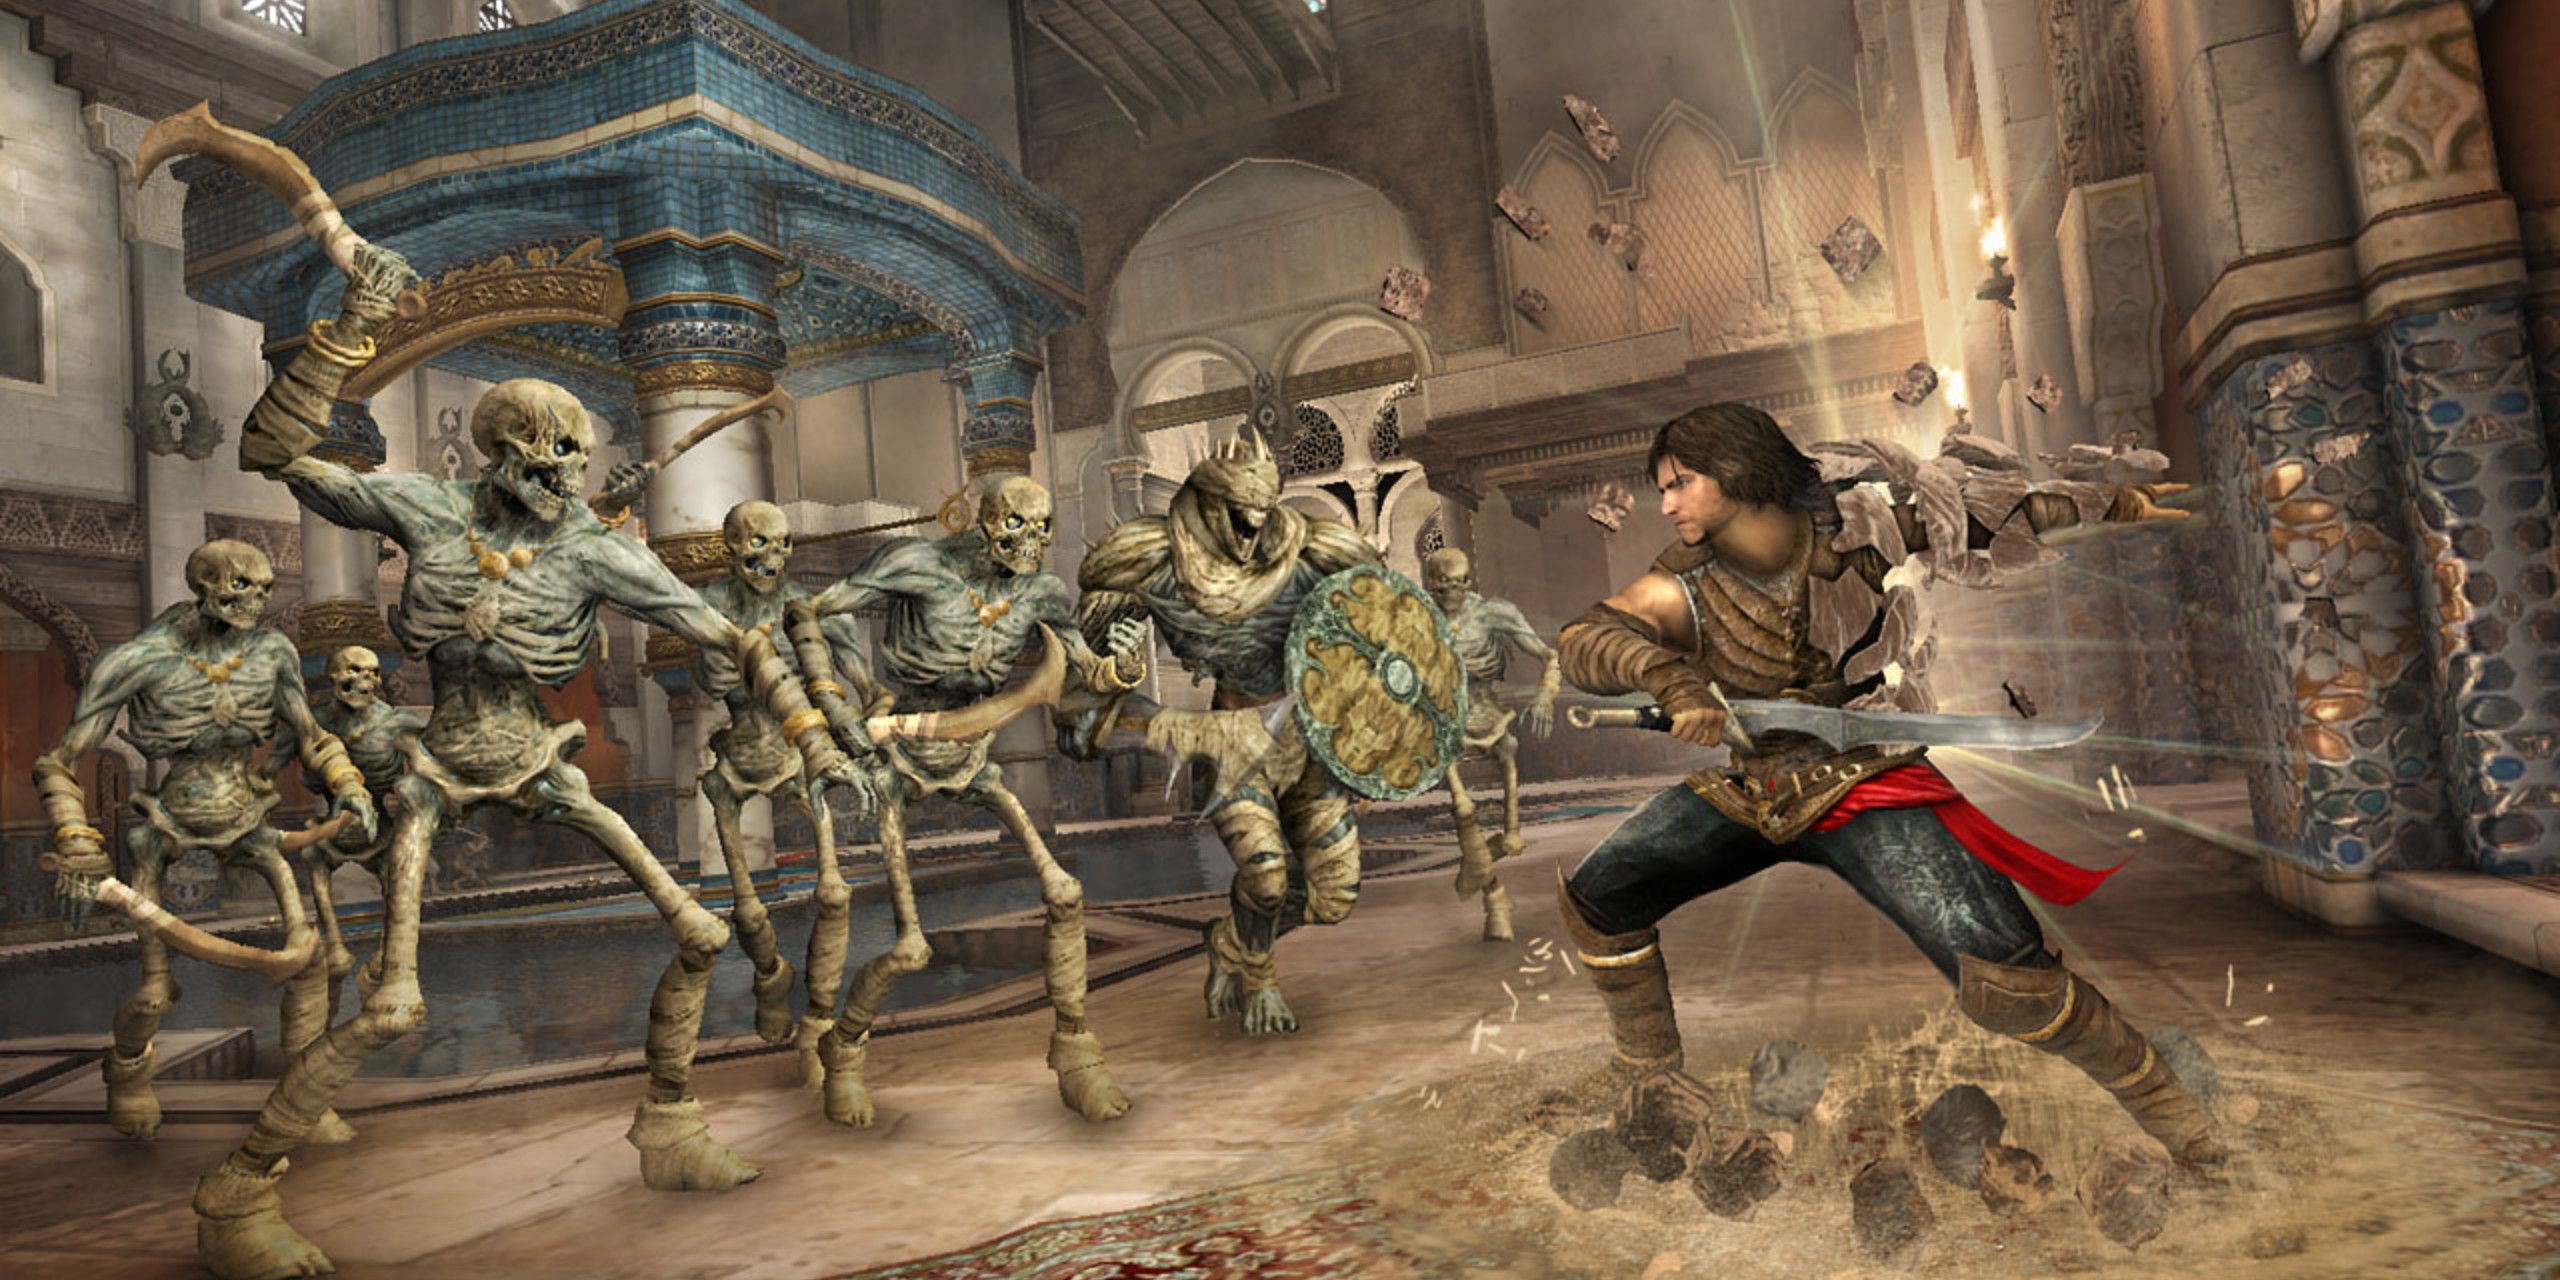 The Prince fighting off a horde of undead skeletons